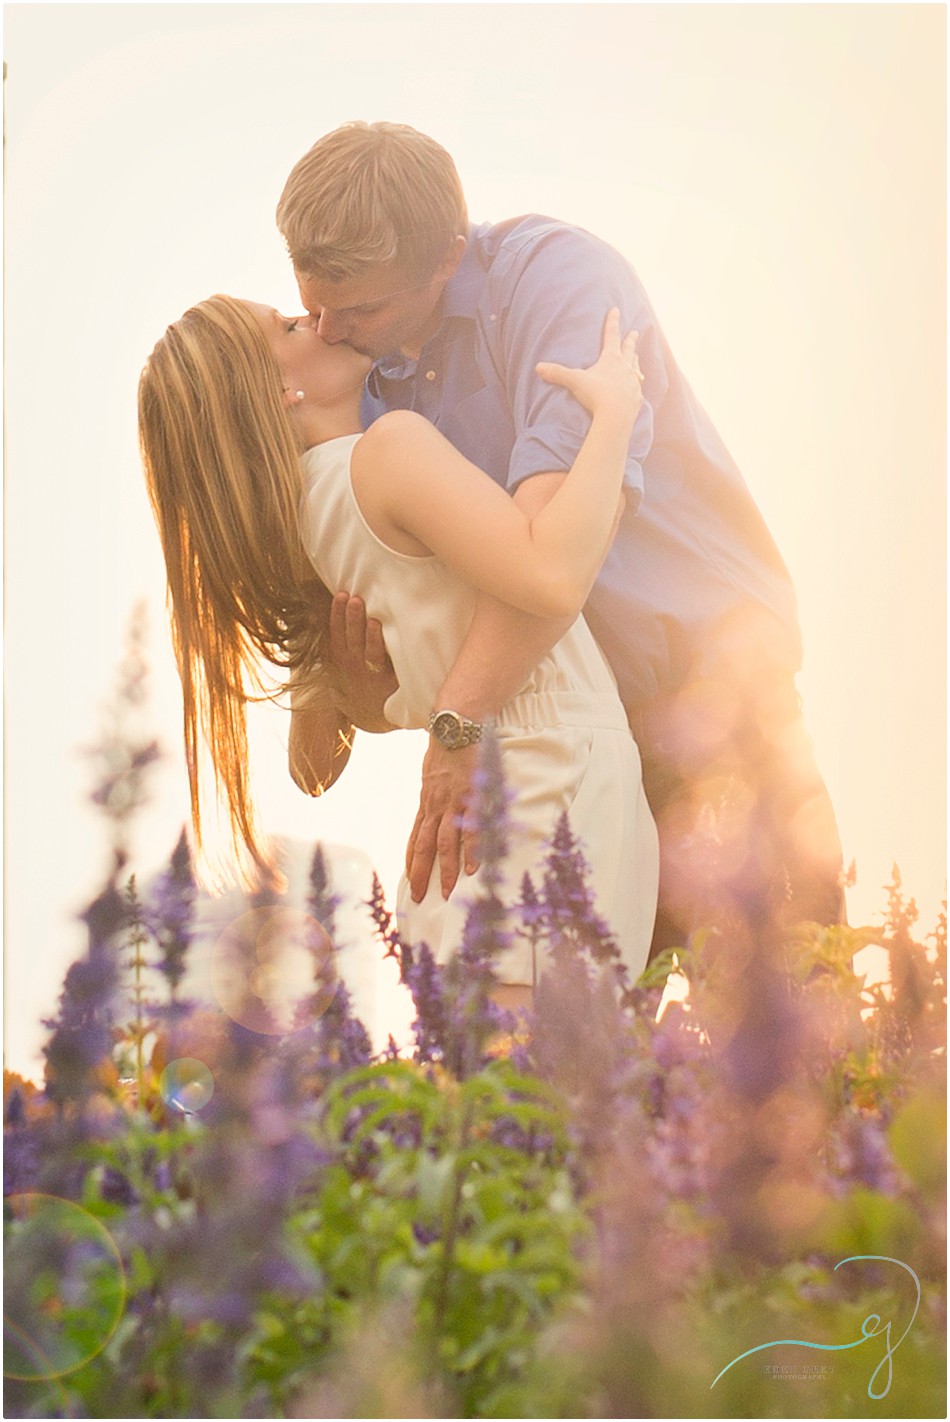 Kissing in a Field of Flowers